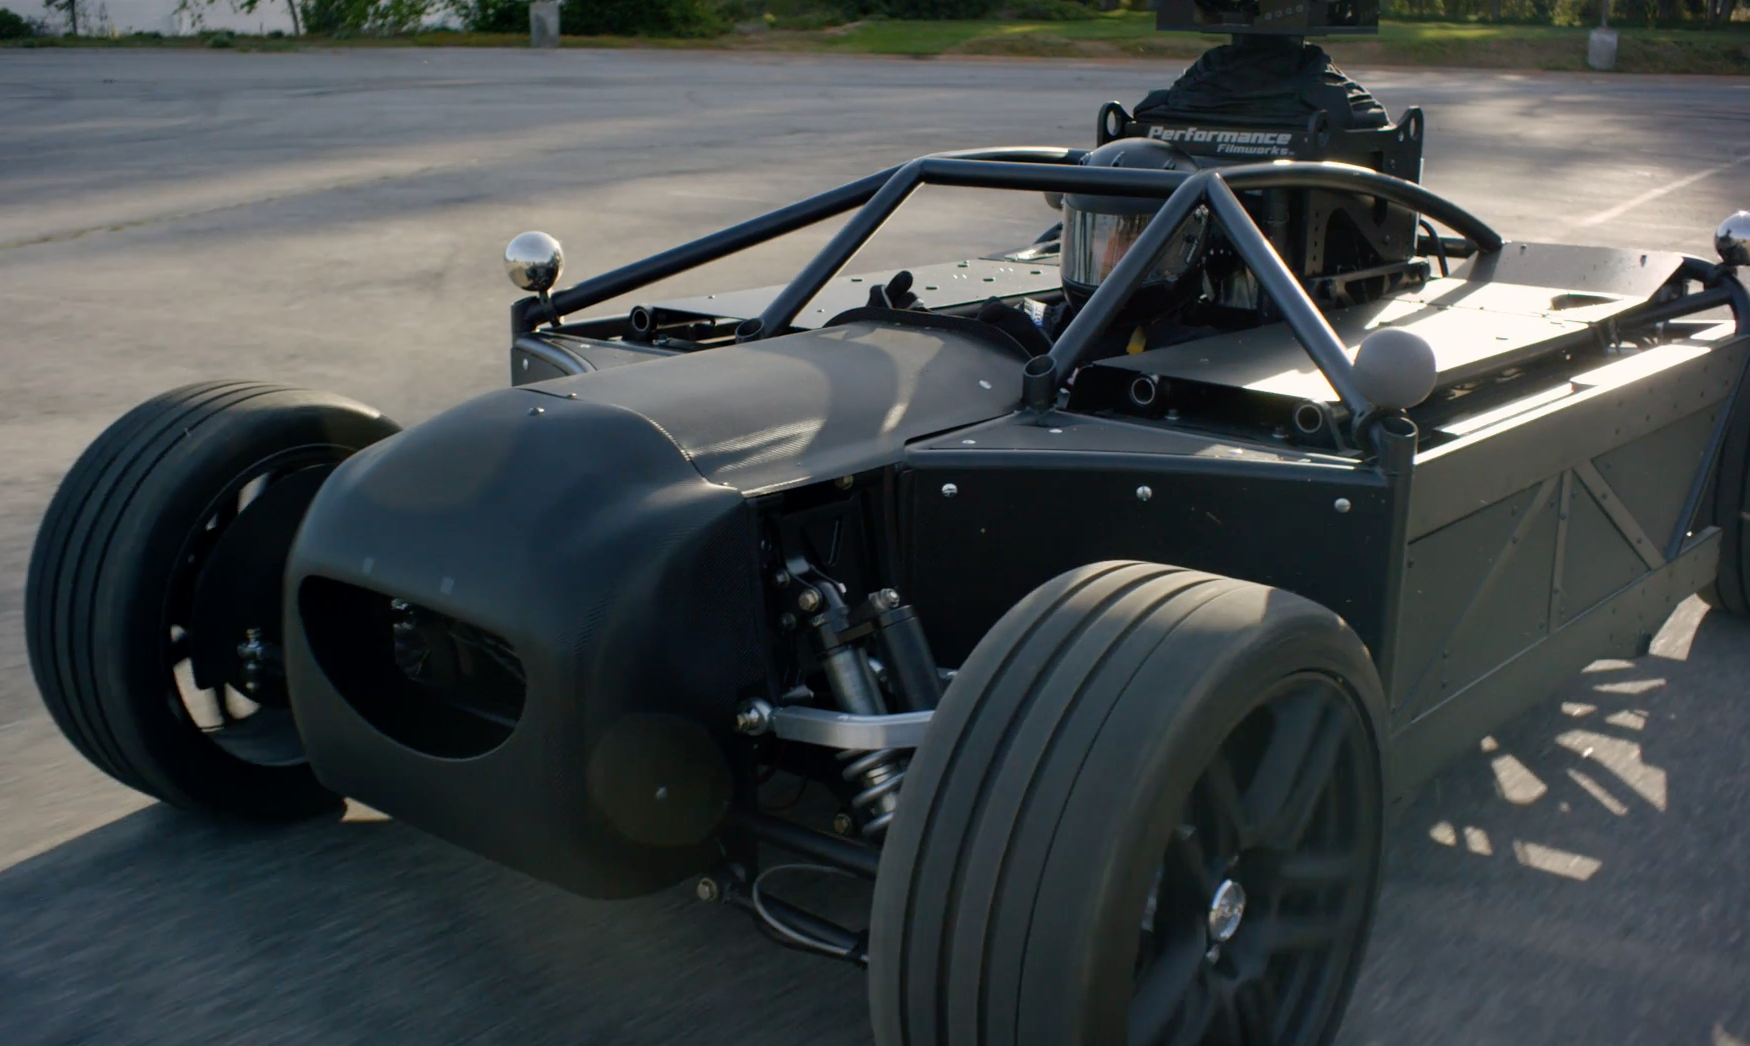 The future of car filming: THE BLACKBIRD